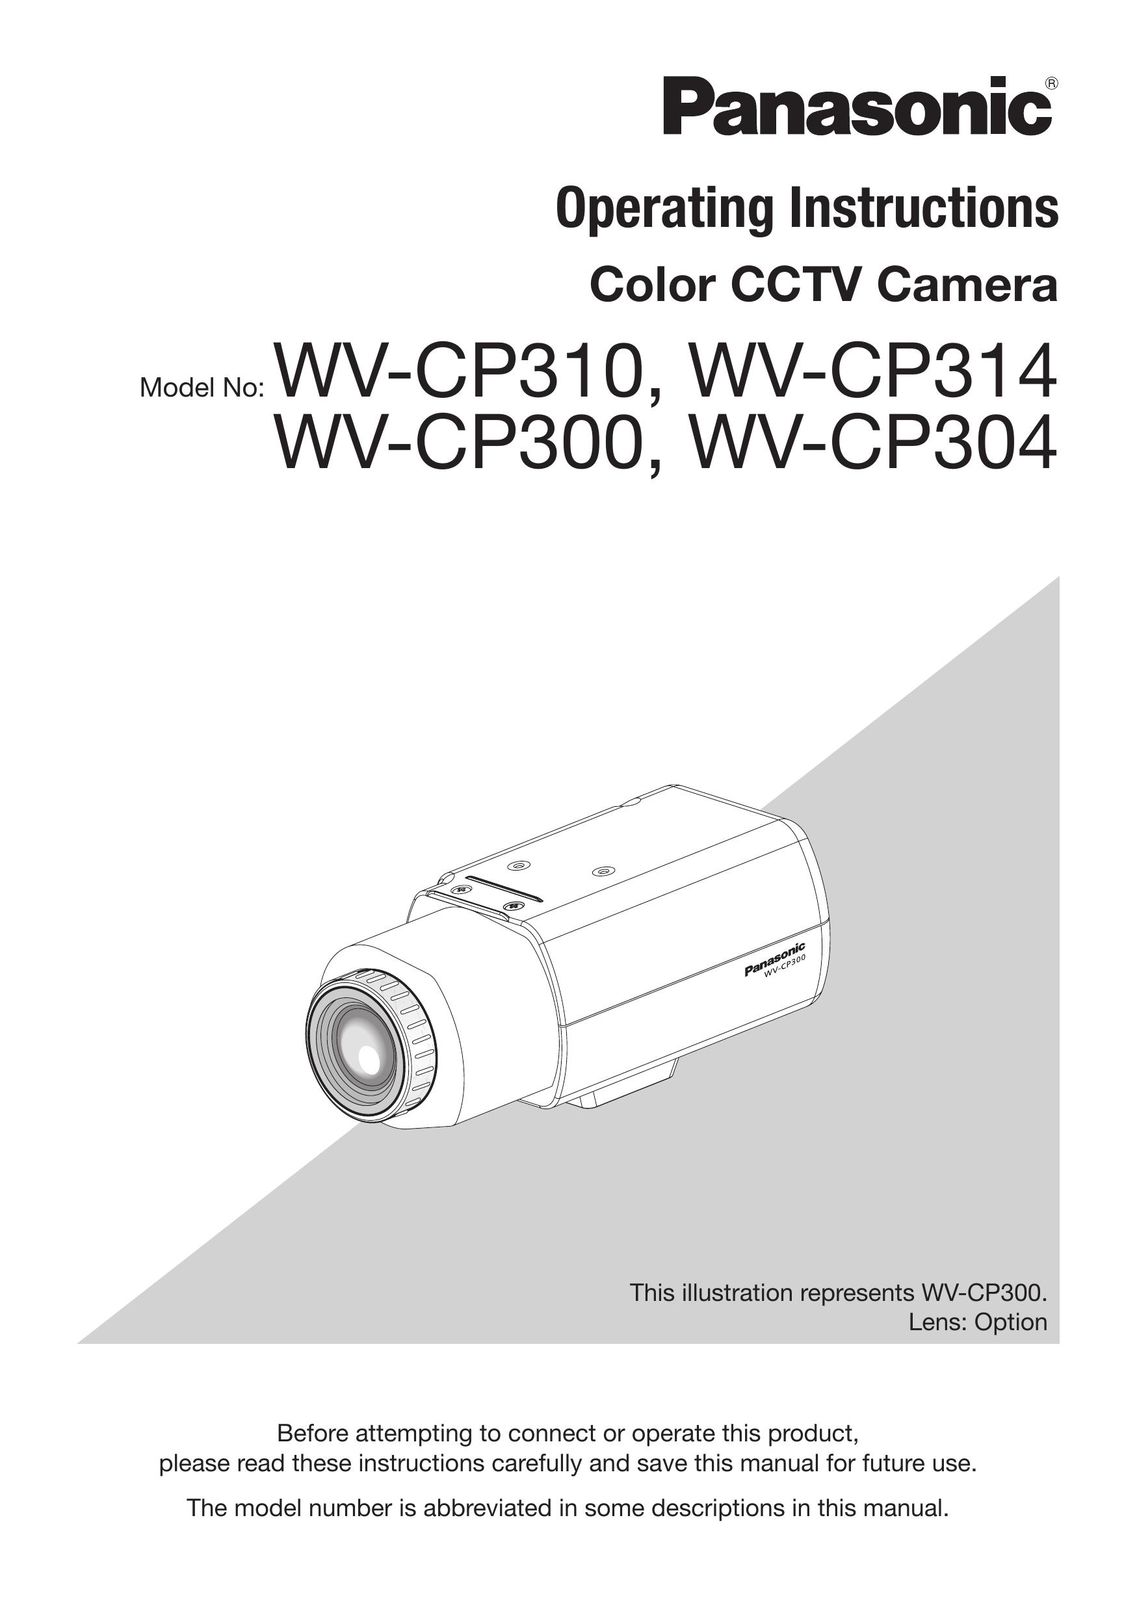 Panasonic WV-CP300 Home Security System User Manual